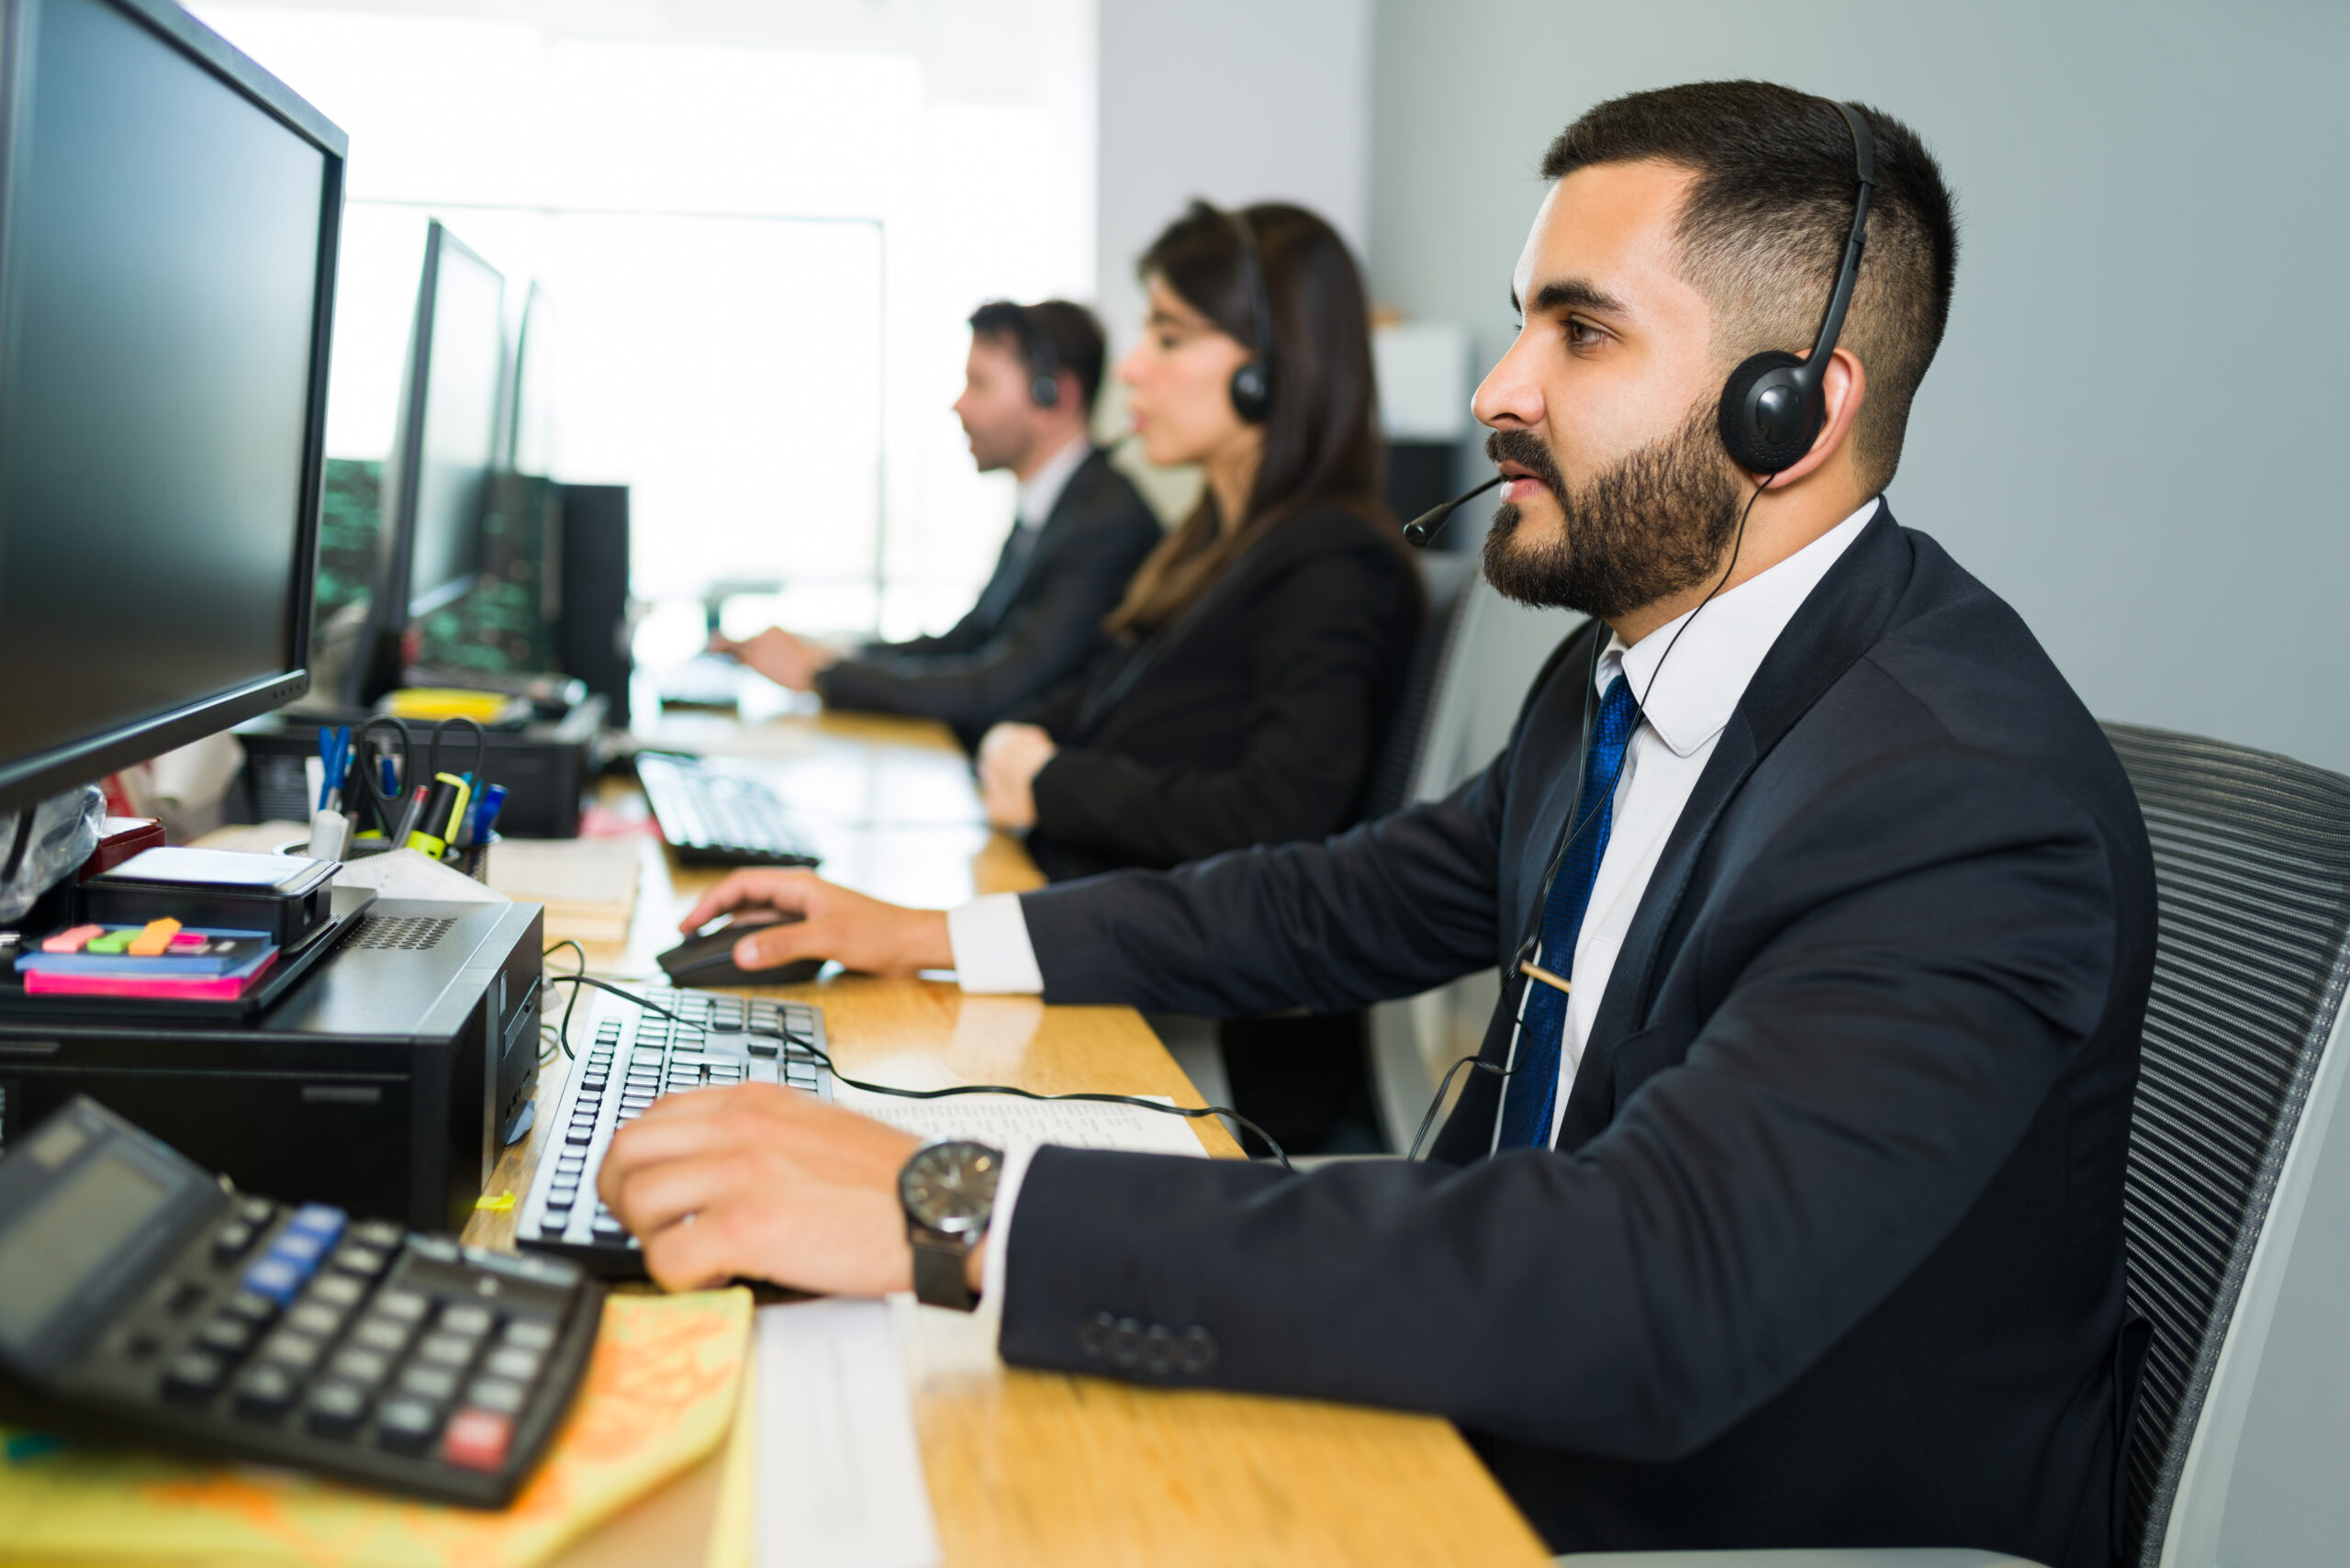 Attractive latin executive offering customer service with a headset and offering tech support at a busy call center